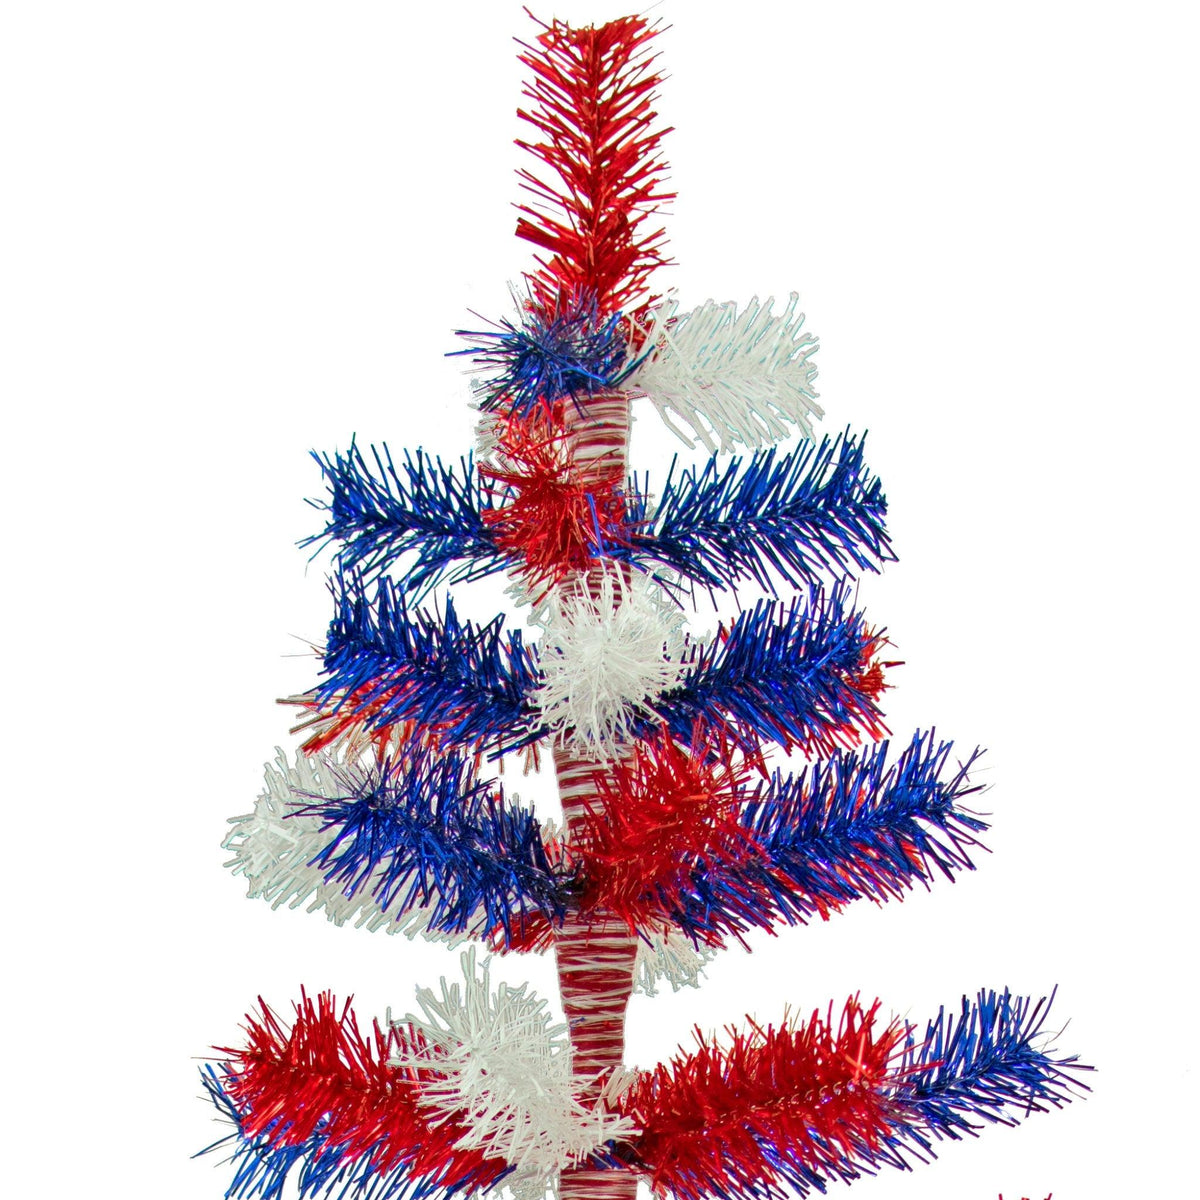 Top of the 60in Tall Red White and Blue Mixed Tinsel Christmas Tree on sale at leedisplay.com.